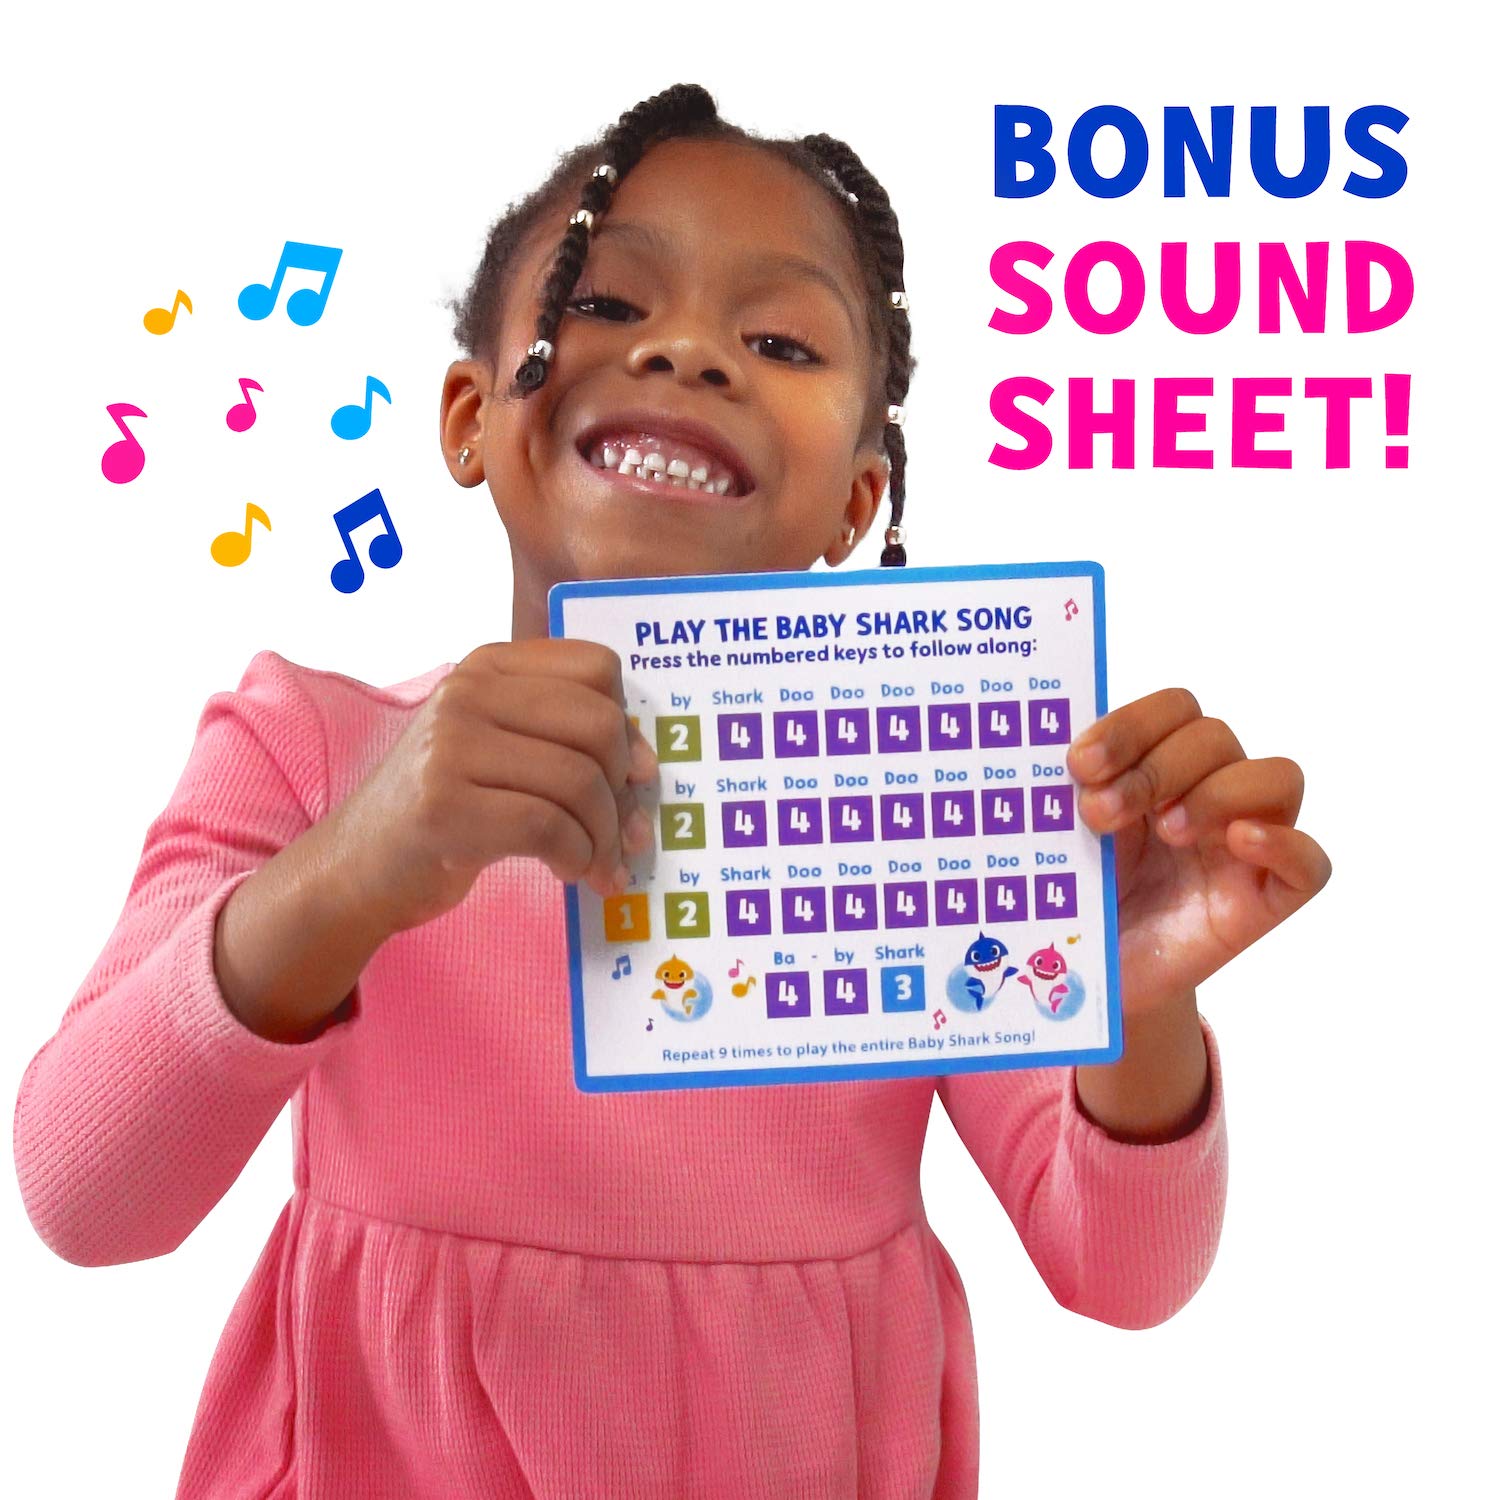 WowWee Pinkfong Baby Shark Official - Step & Sing Piano Dance Mat, Multicolor